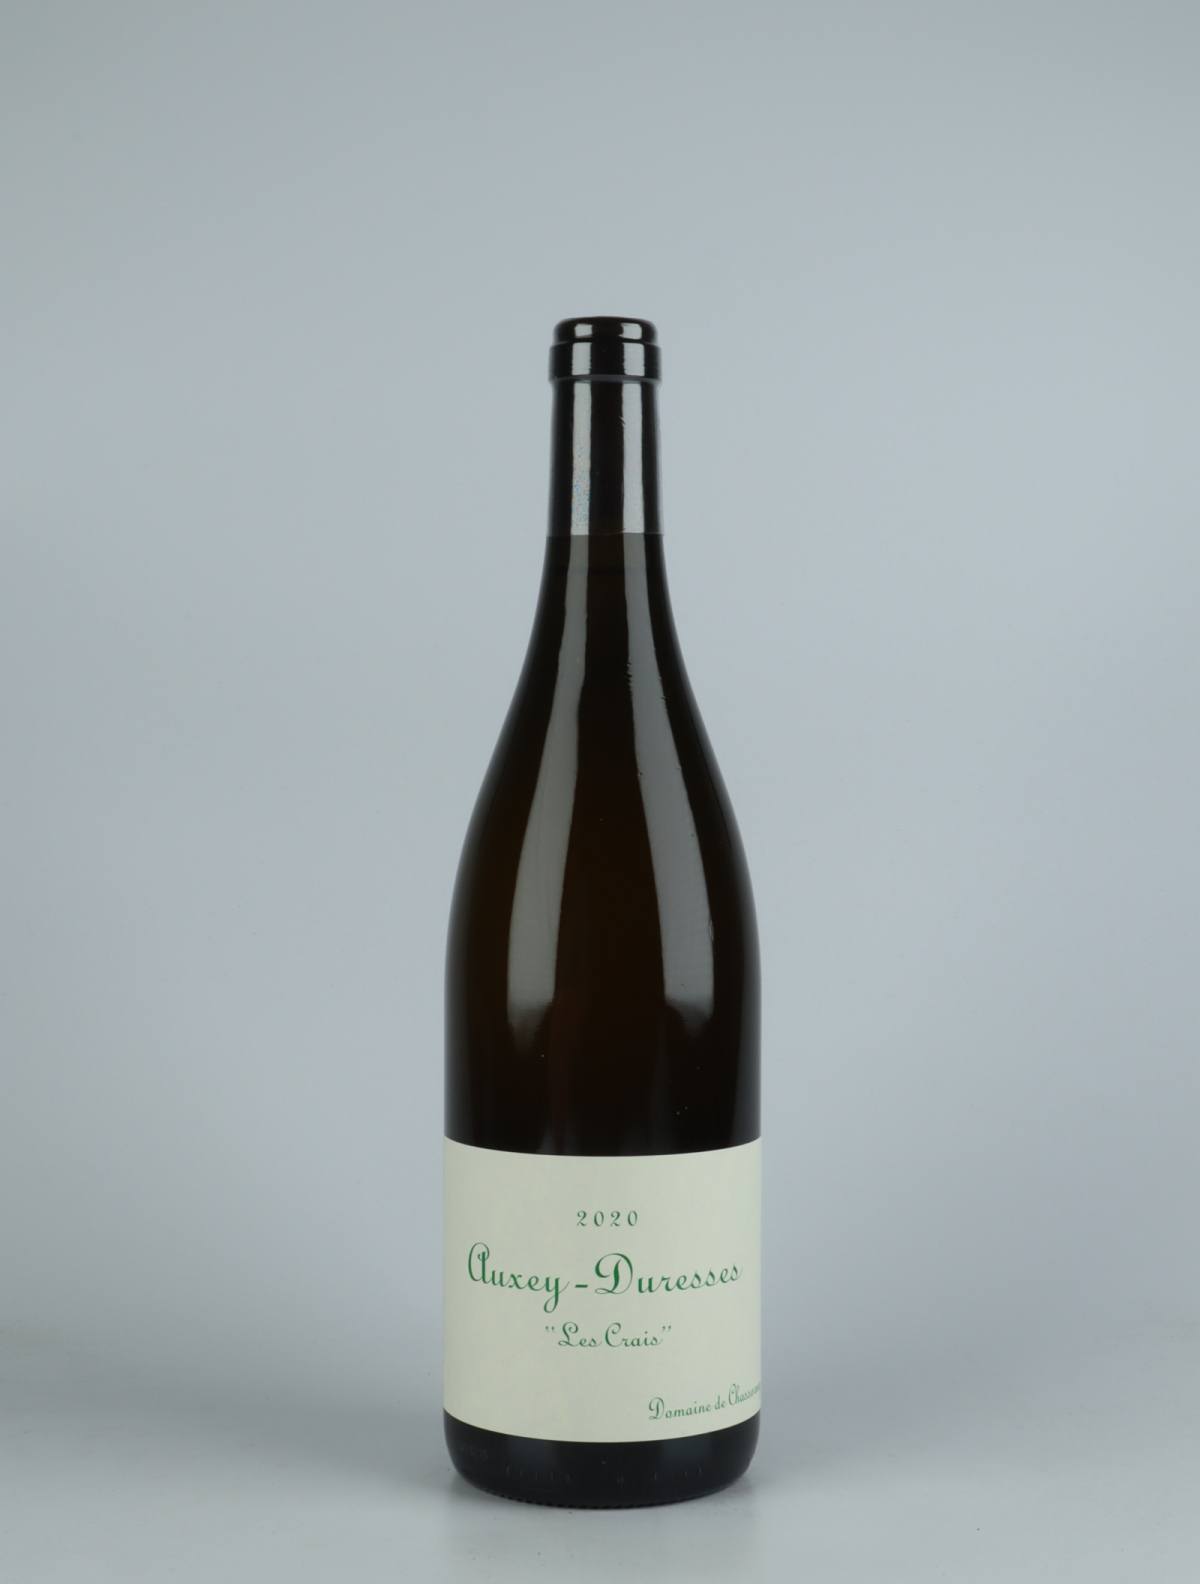 A bottle 2020 Auxey Duresses Blanc - Les Crais White wine from Domaine de Chassorney, Burgundy in France